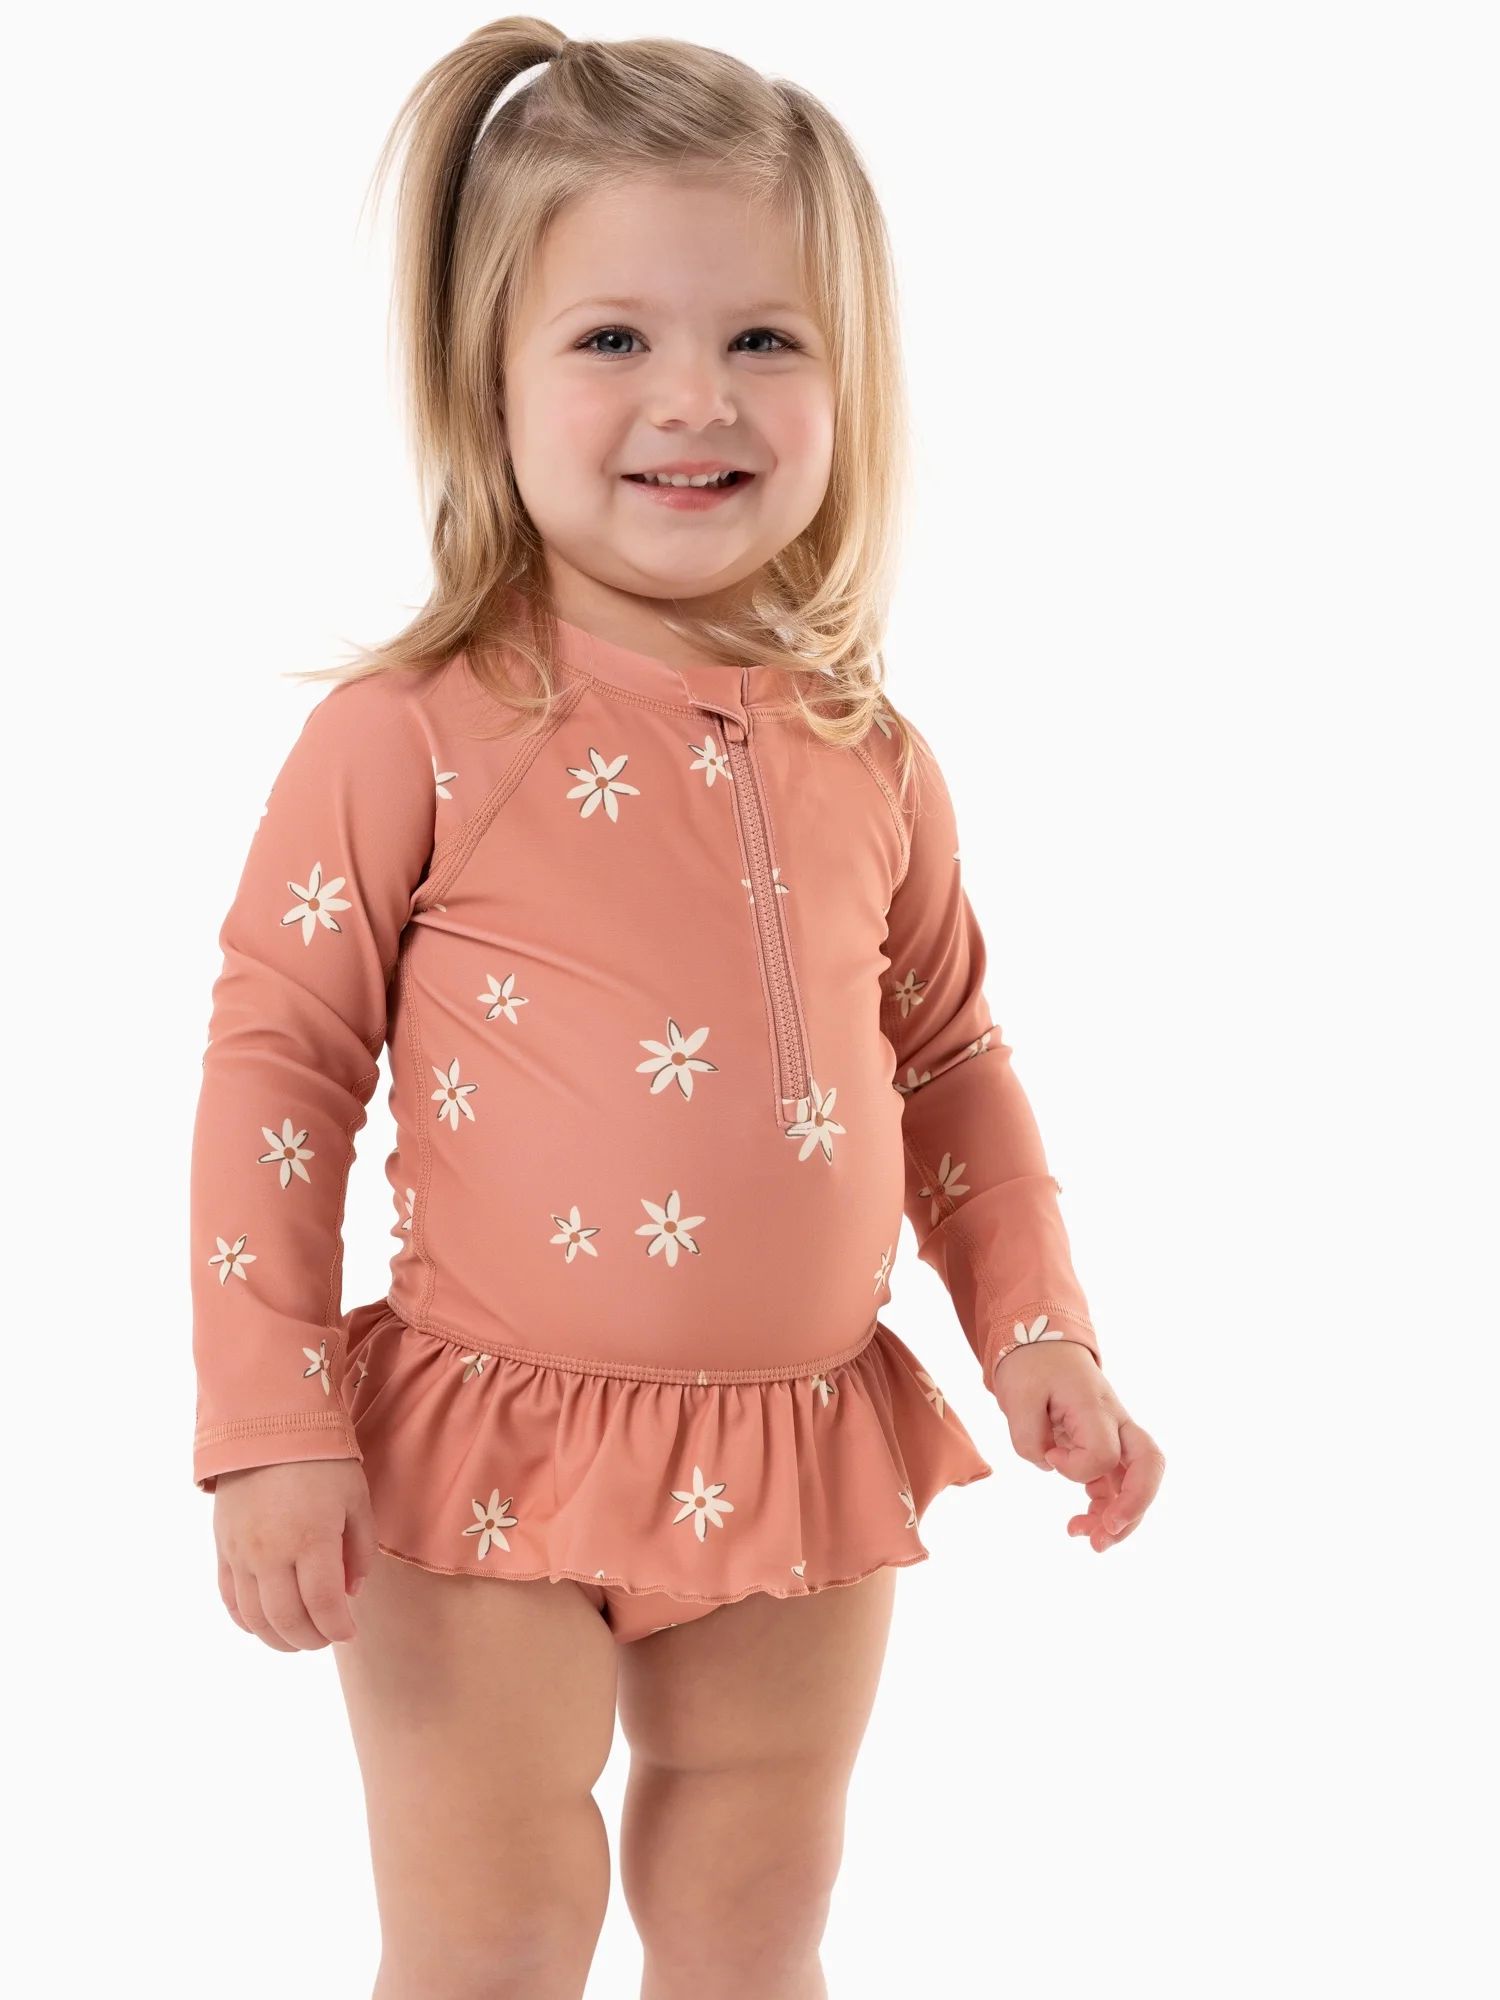 Modern Moments by Gerber Baby and Toddler Girl Swimsuit, Sizes 12M - 5T | Walmart (US)